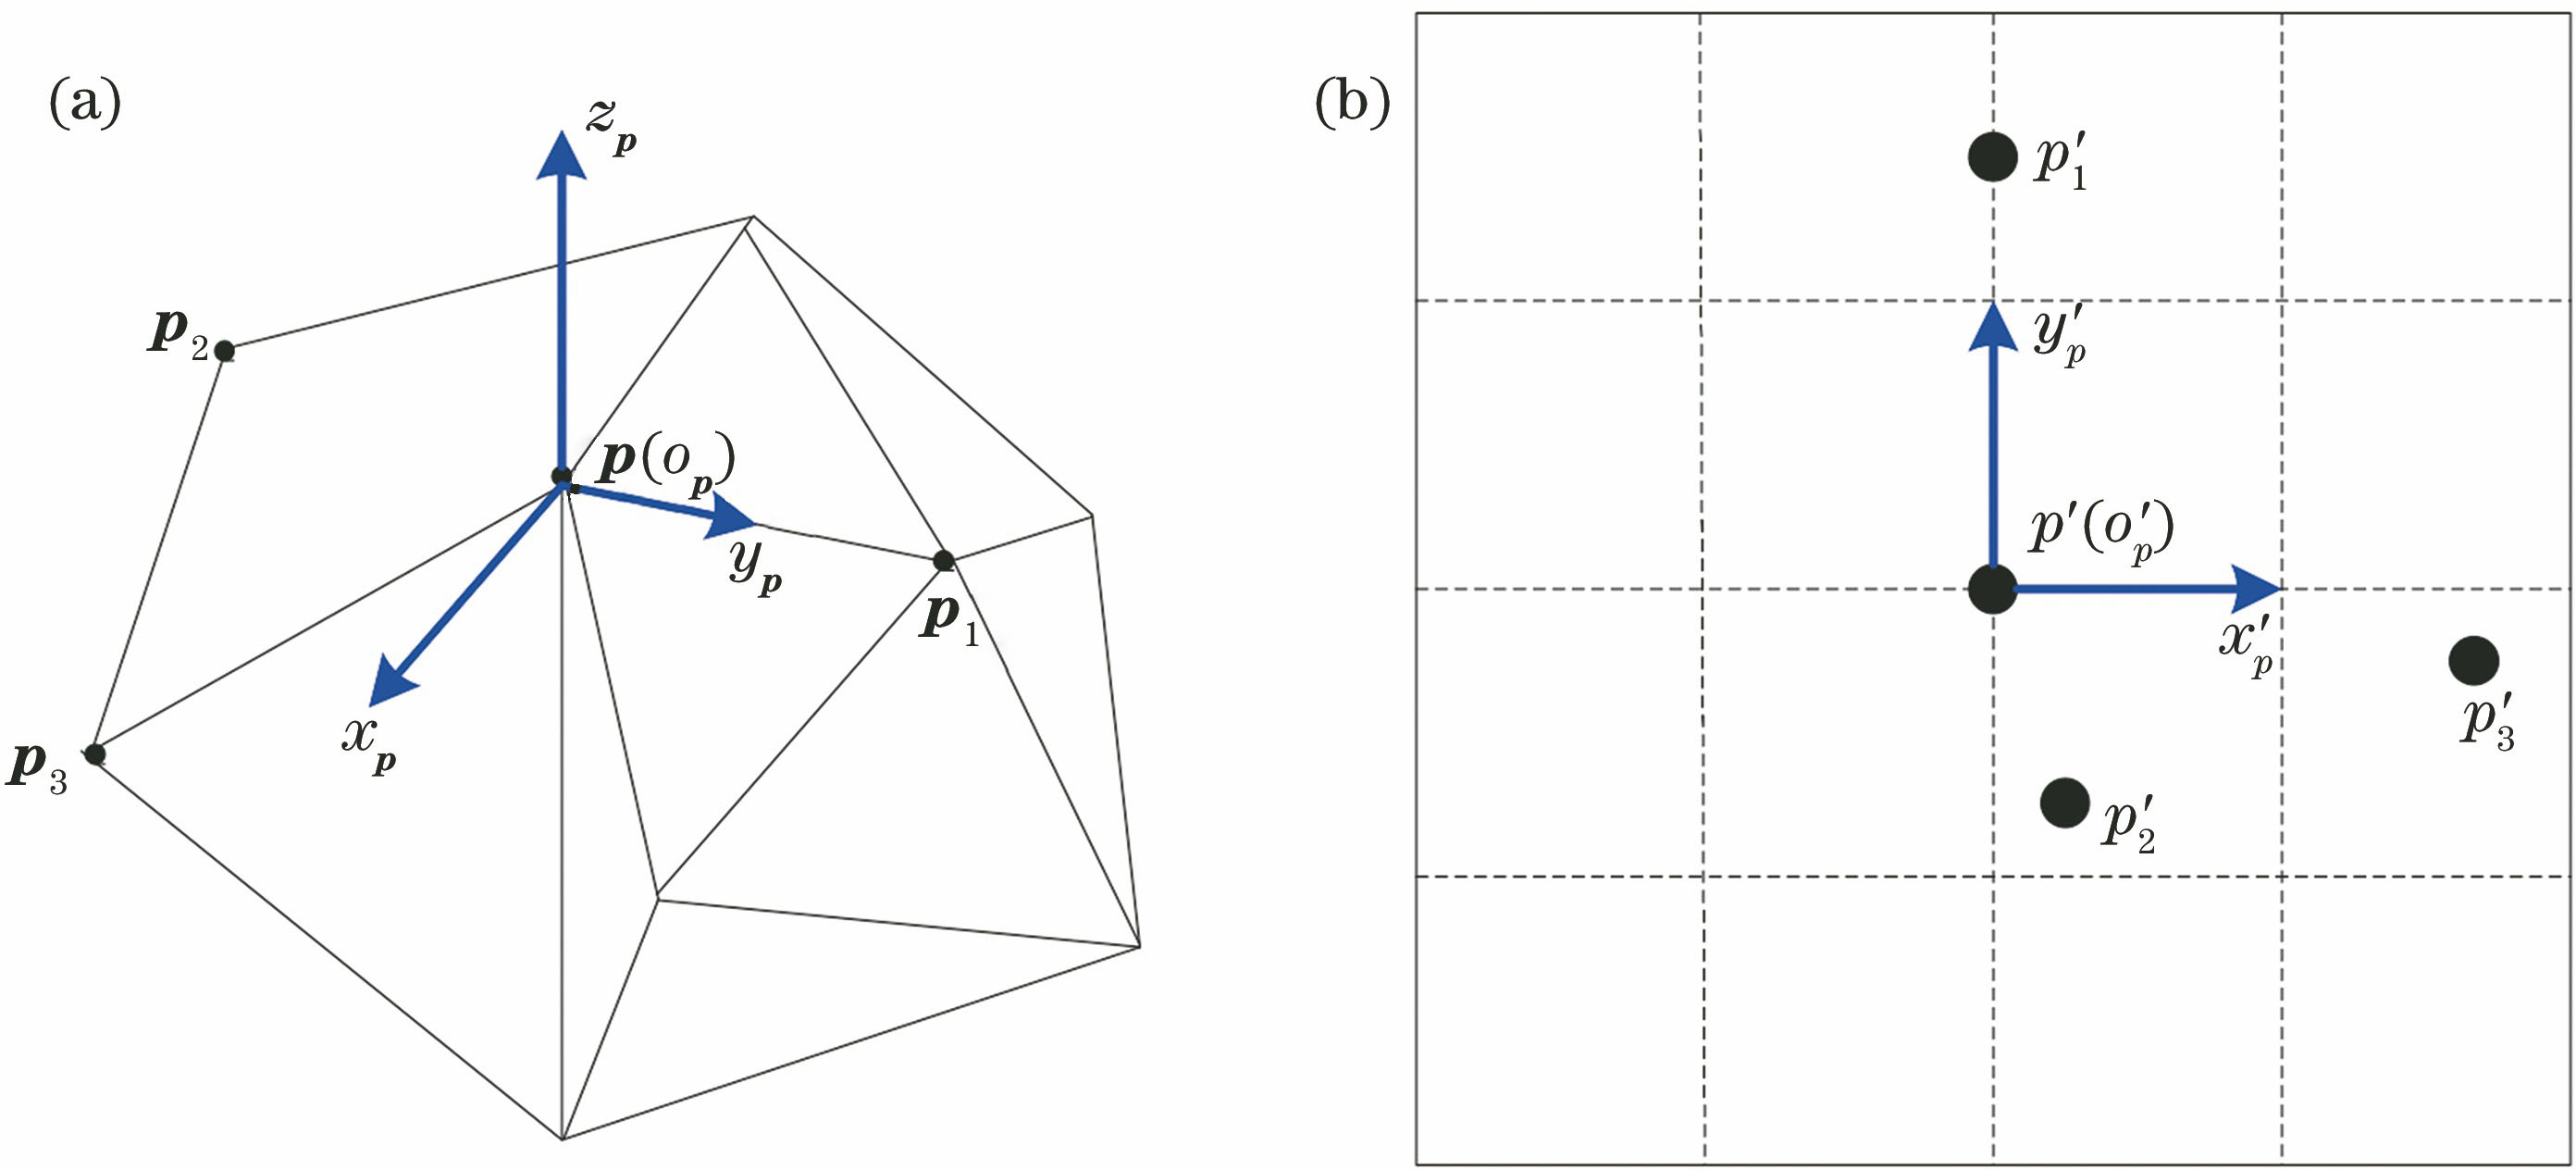 Diagram of local coordinate system and point projection. (a) Feature point p and its neighborhood point {pi} in local coordinate system op-xpypzp; (b) projection points on two-dimensional plane